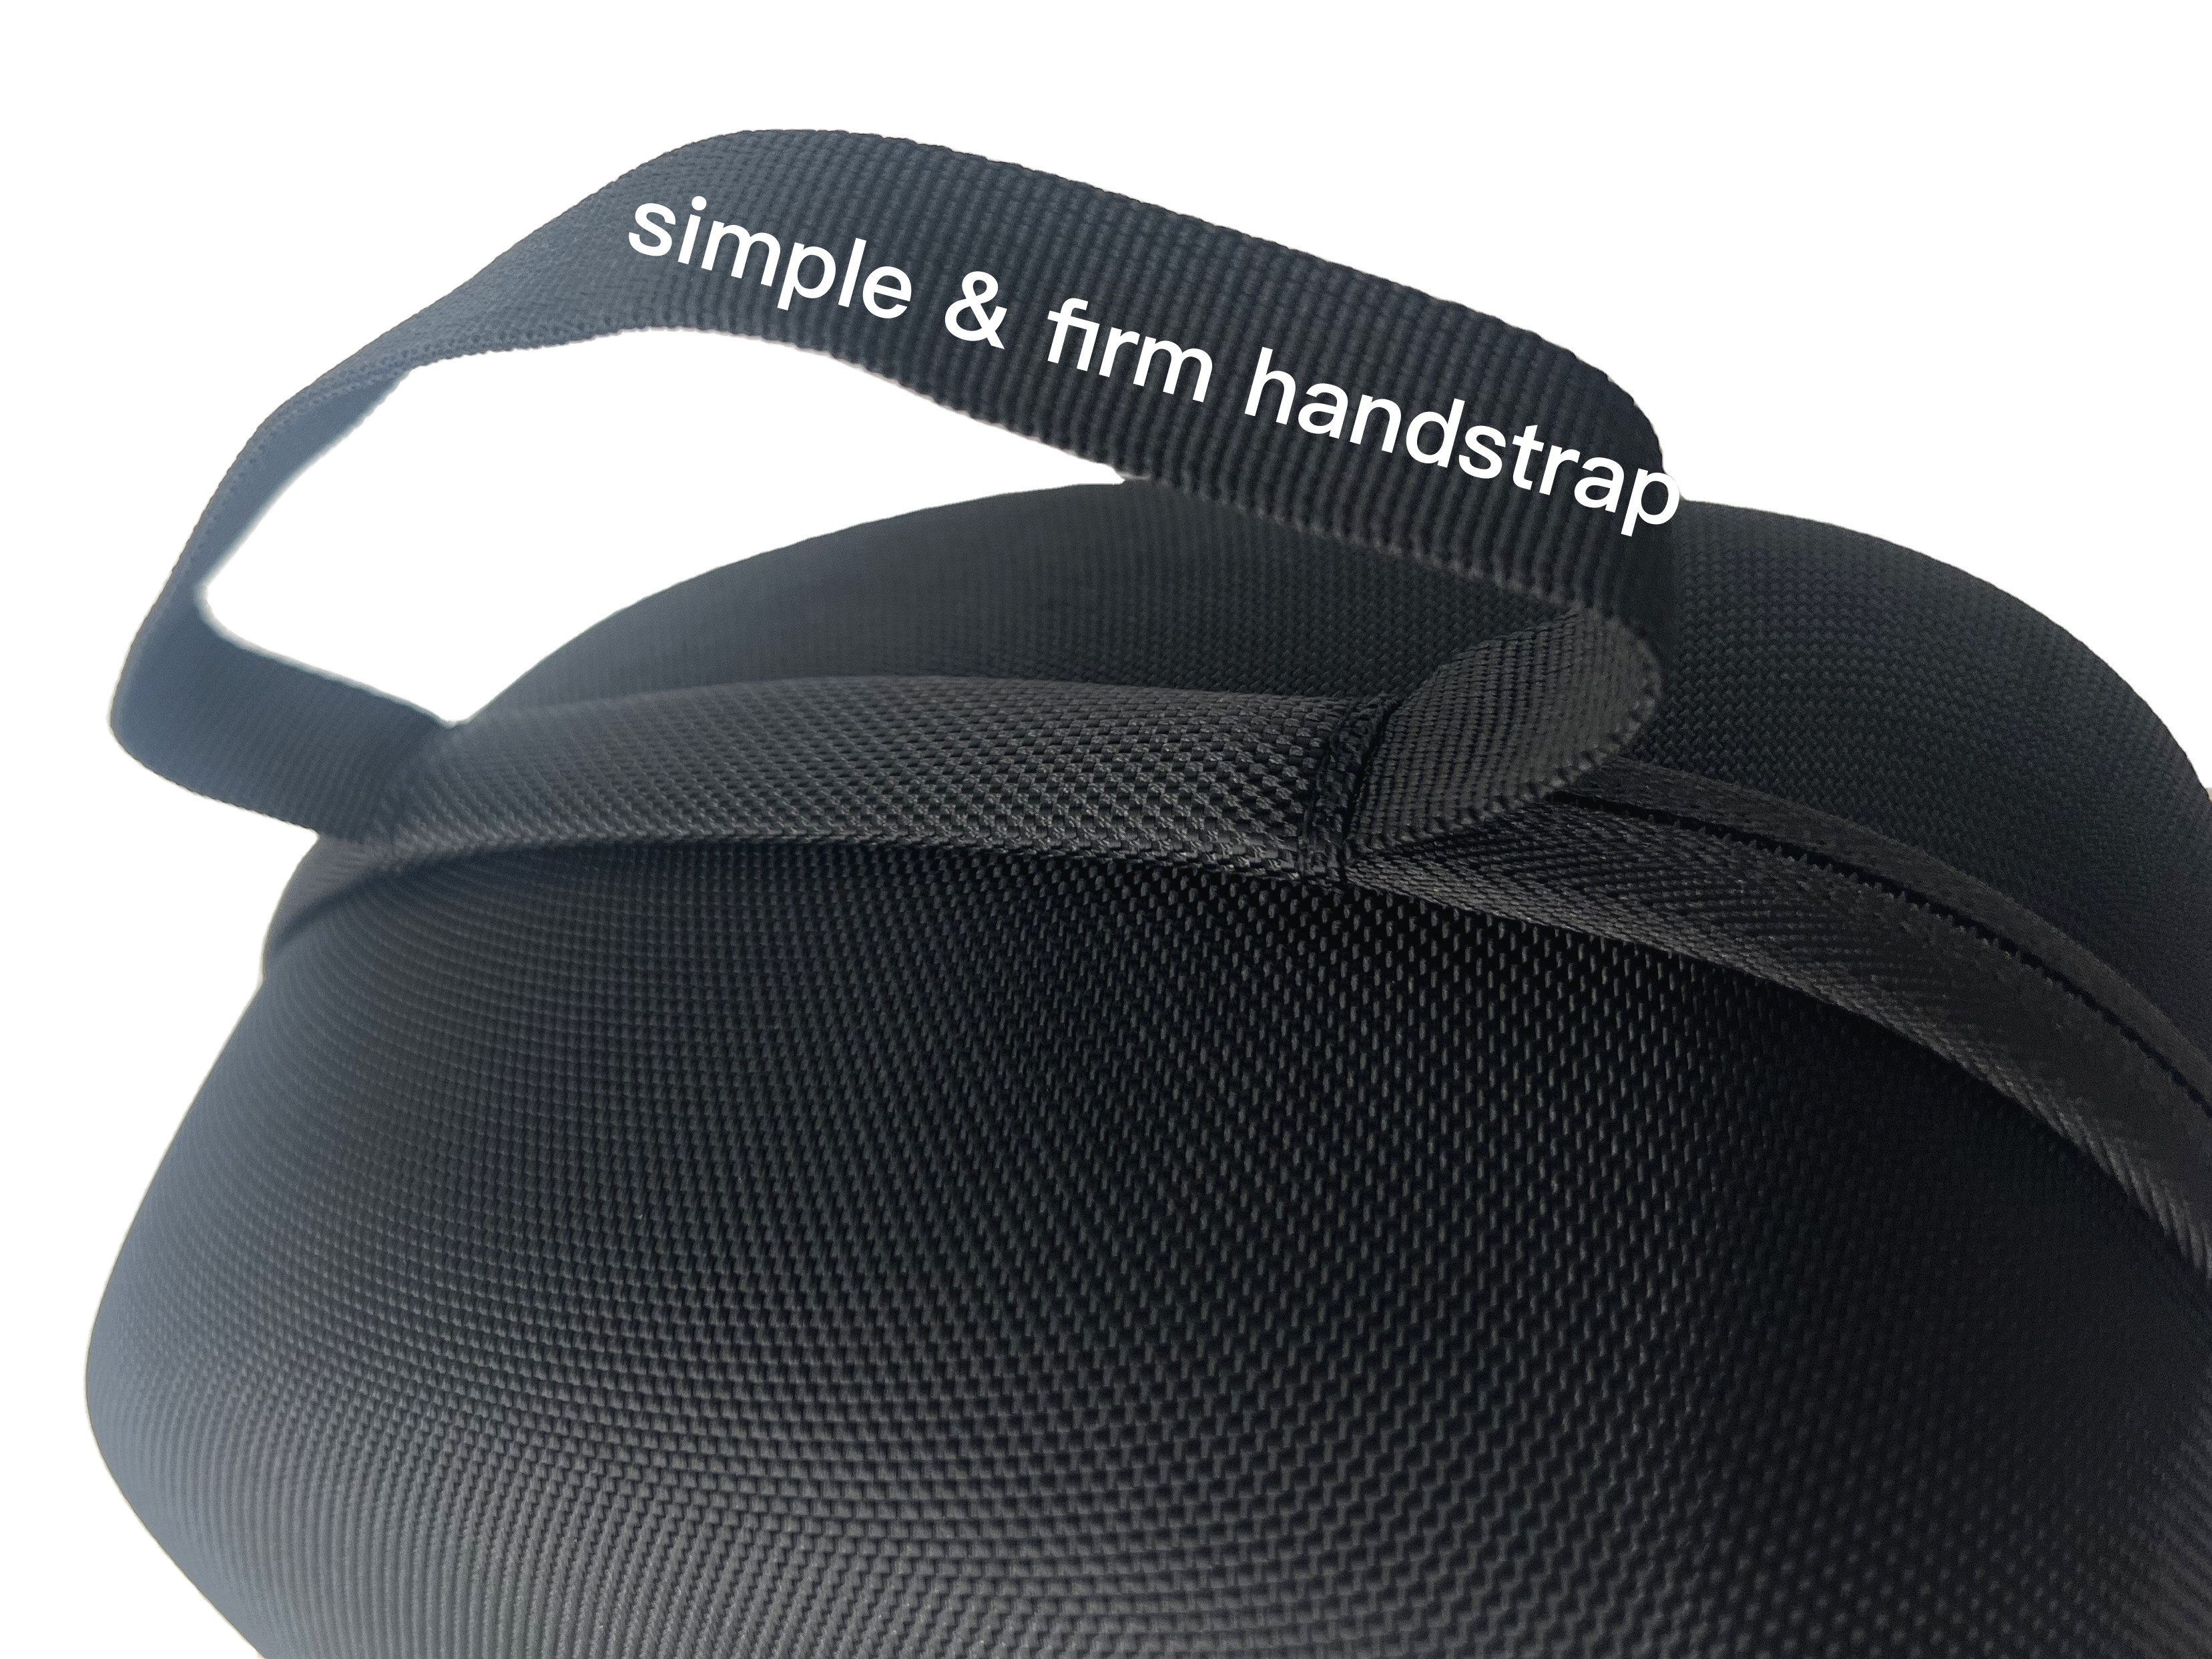 VR Carrying Case Compatible with several VR Gaming Headset